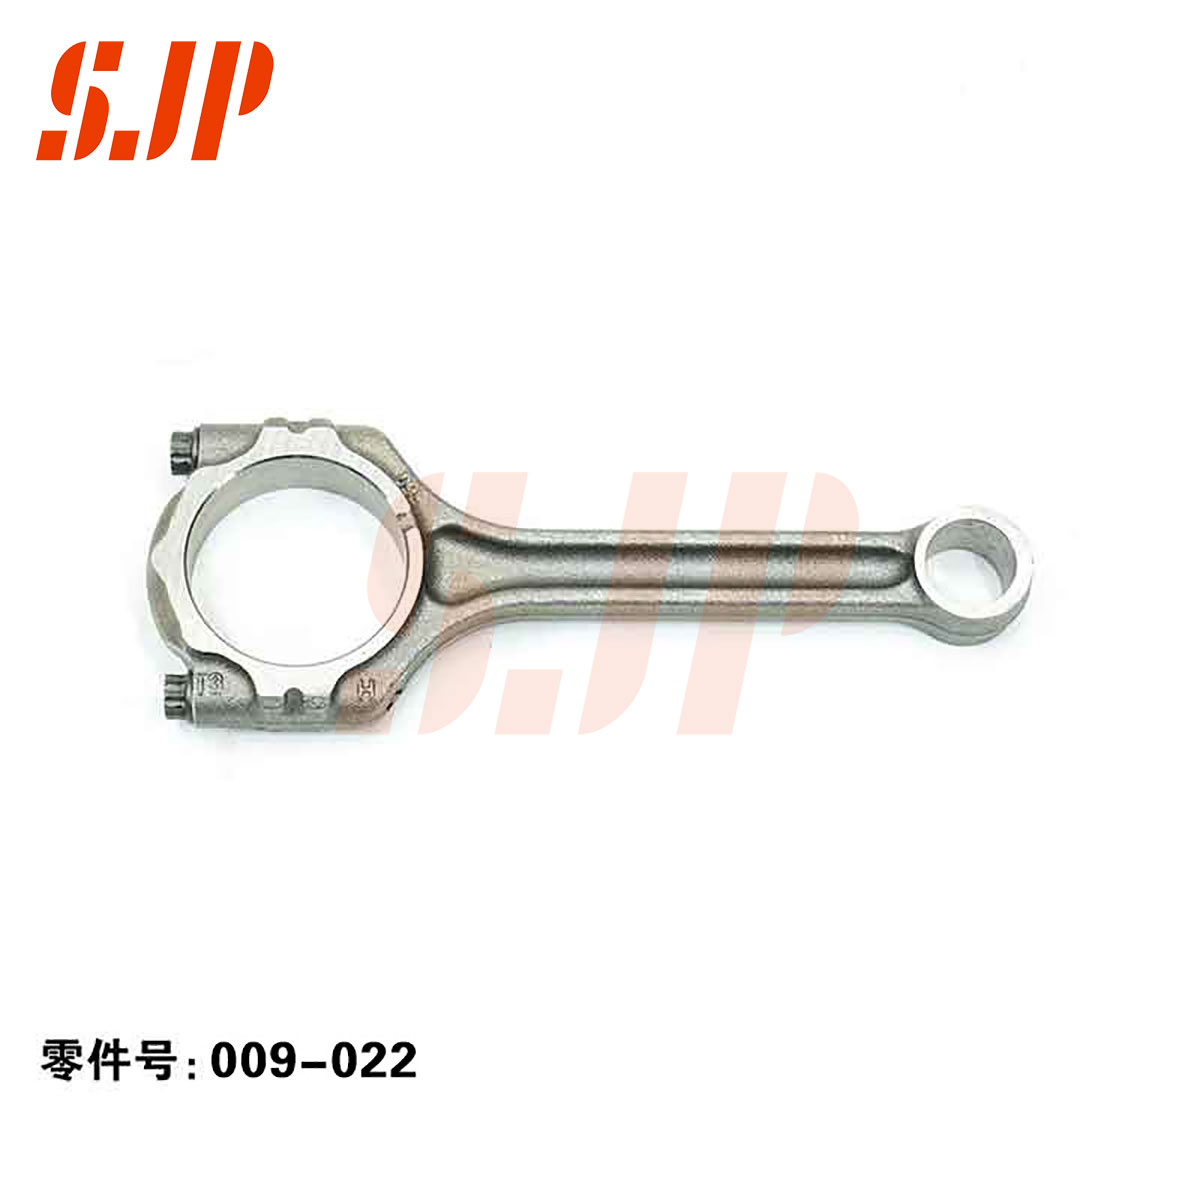 SJ-009-022 Connecting Rod For 4A91/DG15